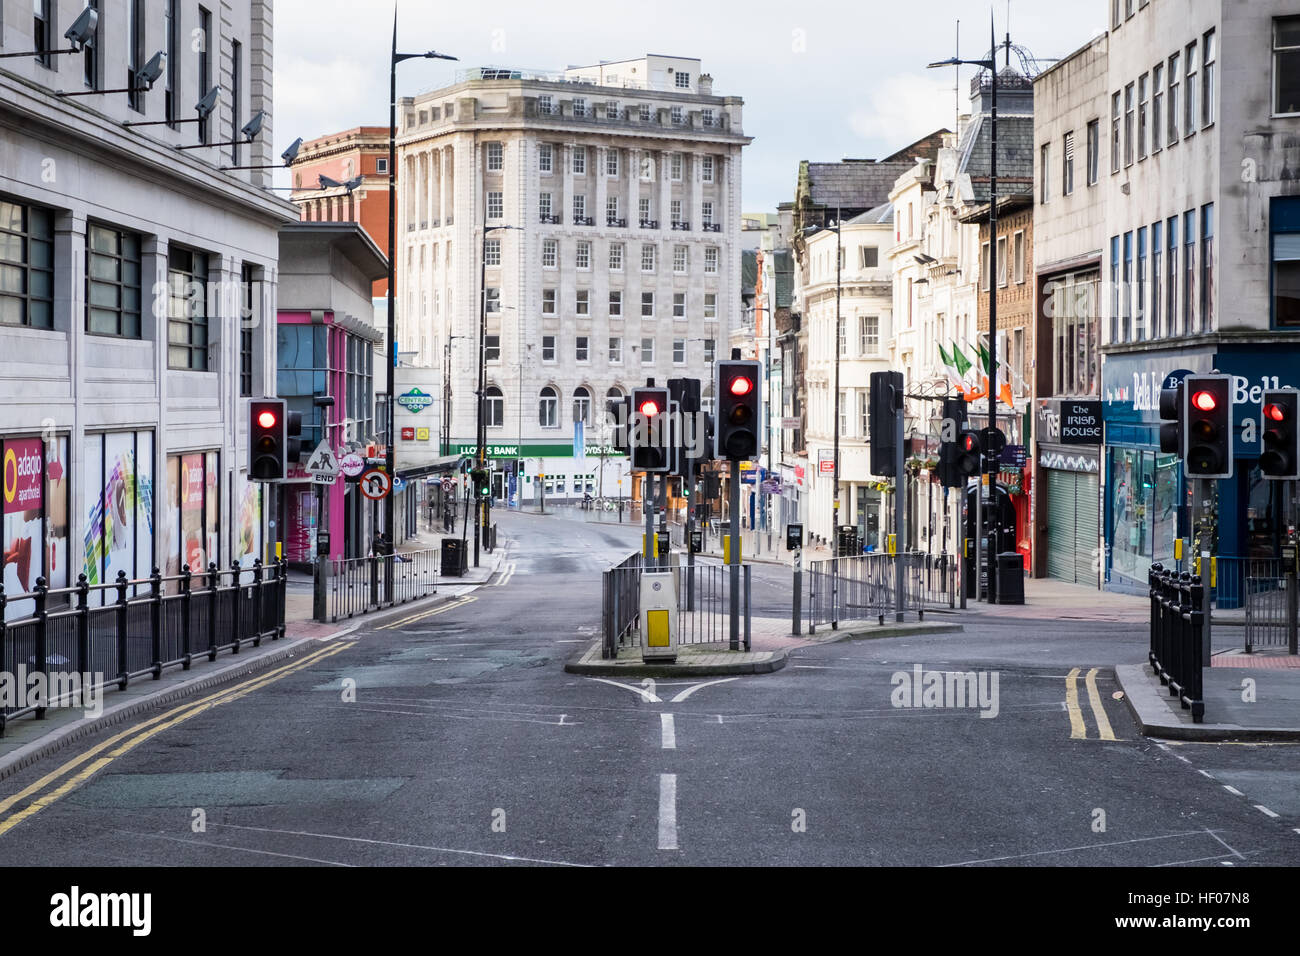 Liverpool, UK. 25th Dec, 2016. The streets of Liverpool city centre deserted on the morning of Christmas Day (Sunday, December 25,2016). Credit: Christopher Middleton/Alamy Live News Stock Photo